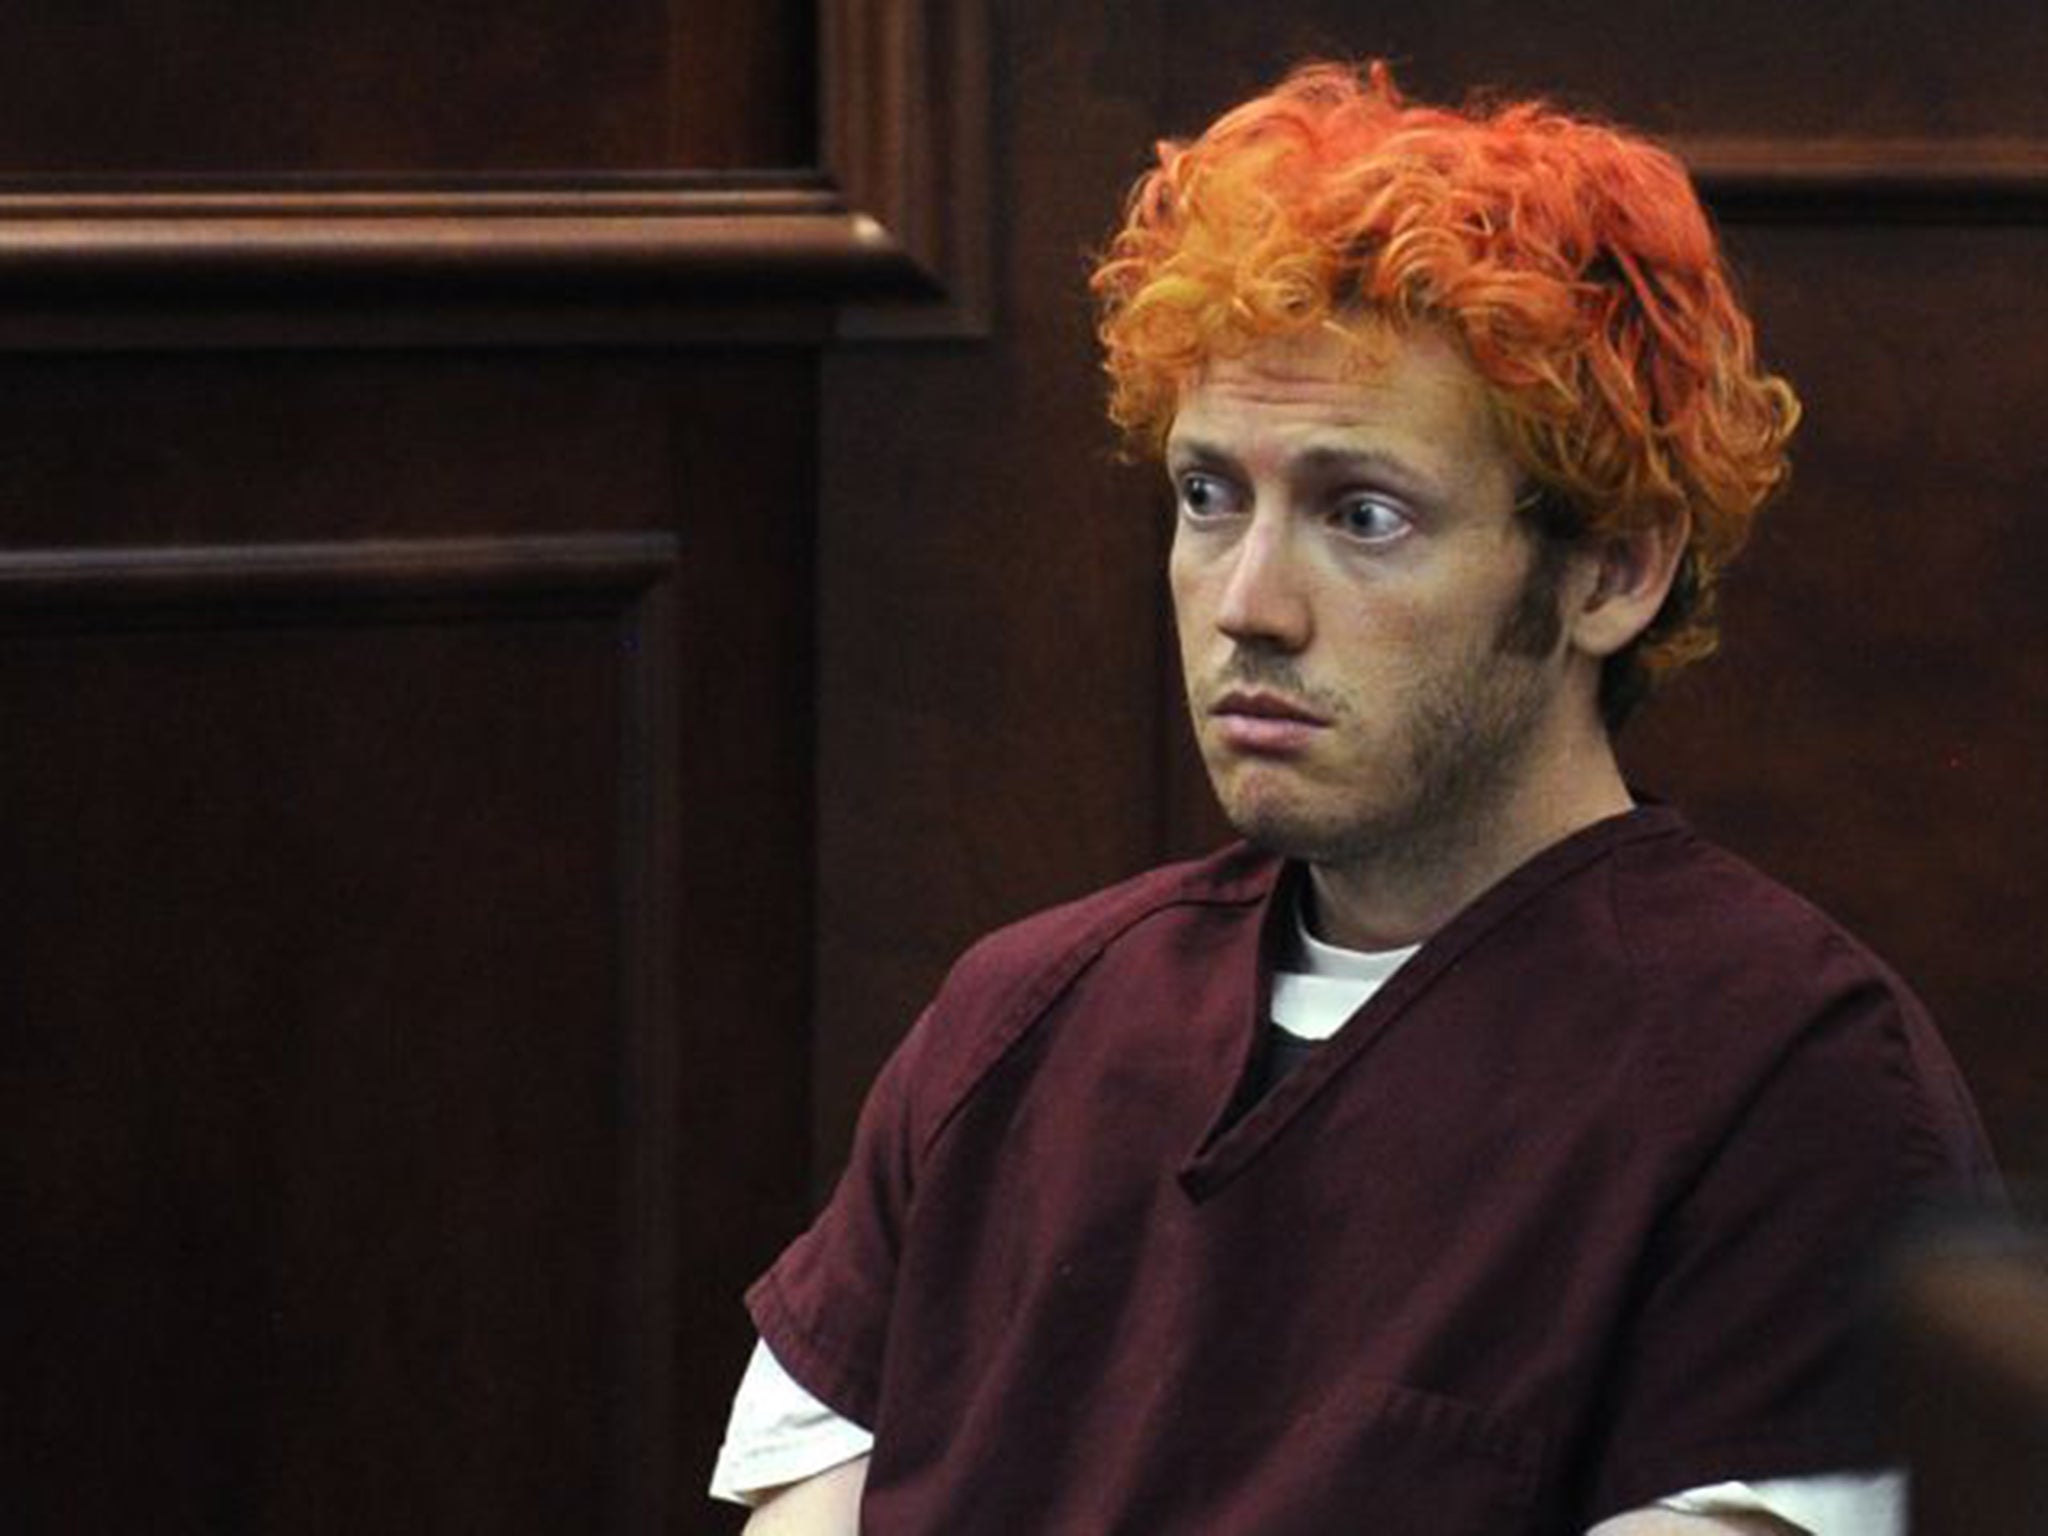 James Holmes’ appearance has changed dramatically since this first court appearance